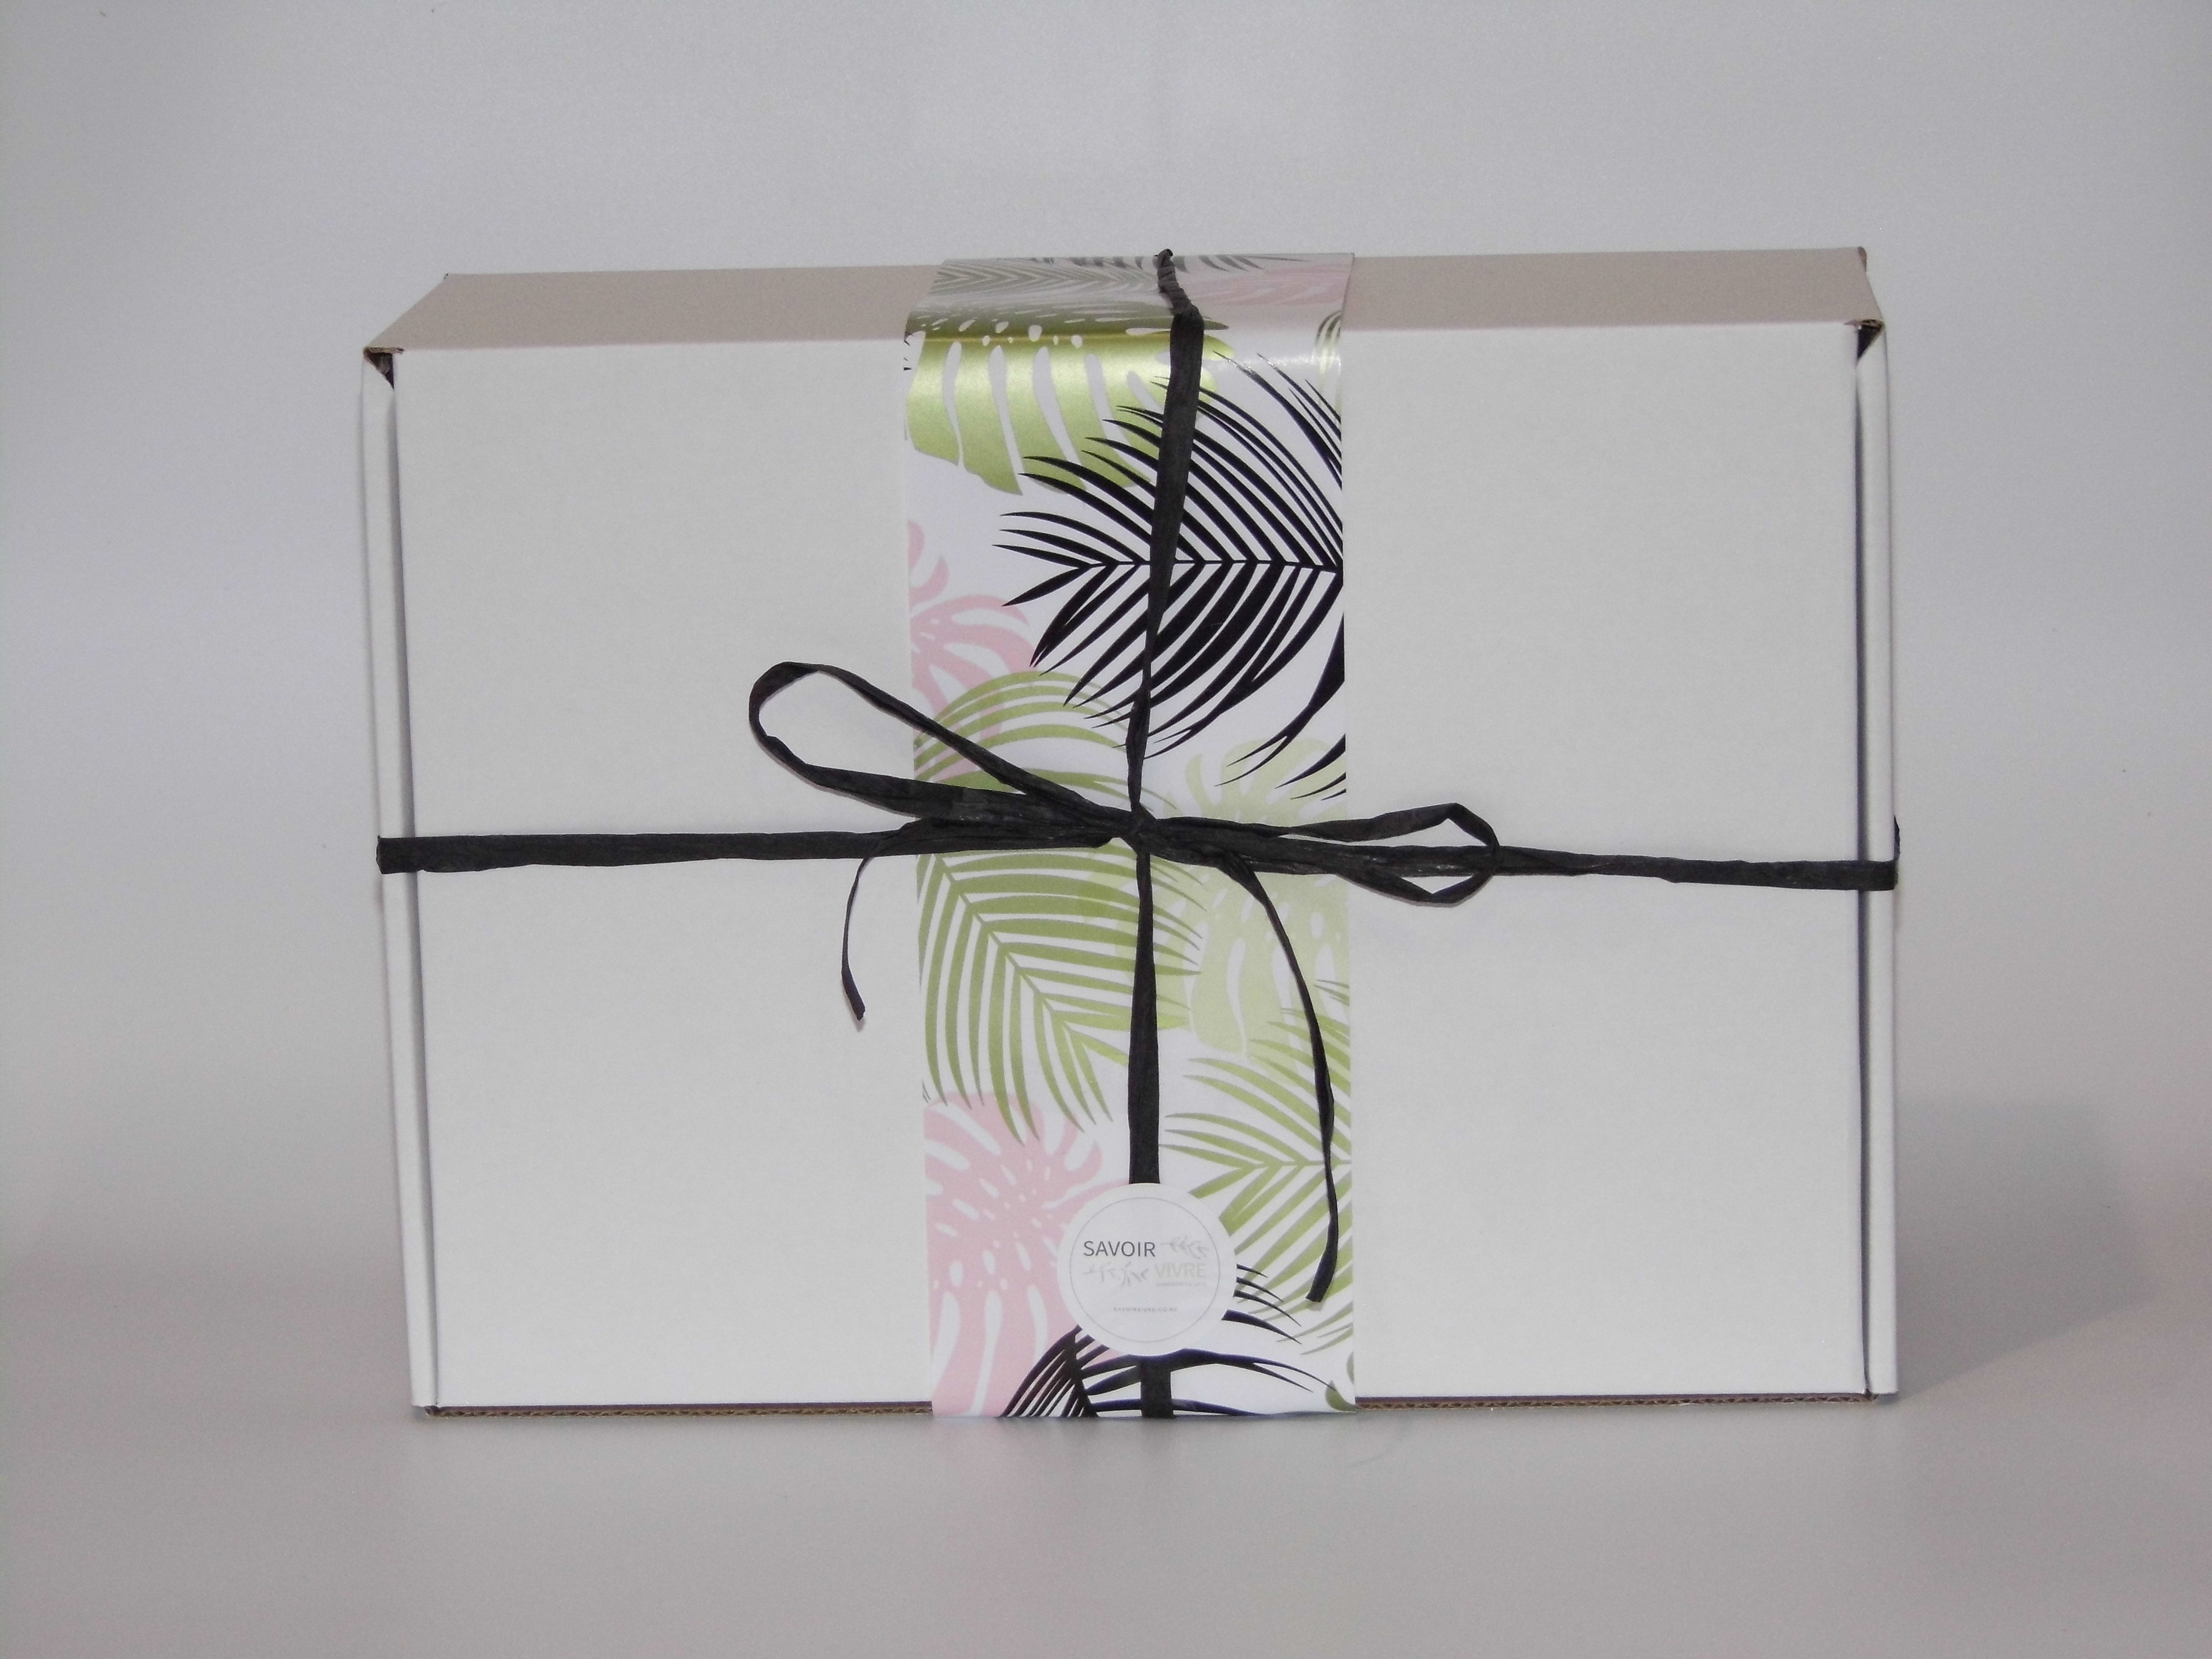 Gift Baskets & Hampers - Buy Online, NZ Delivery | Giftbox Boutique